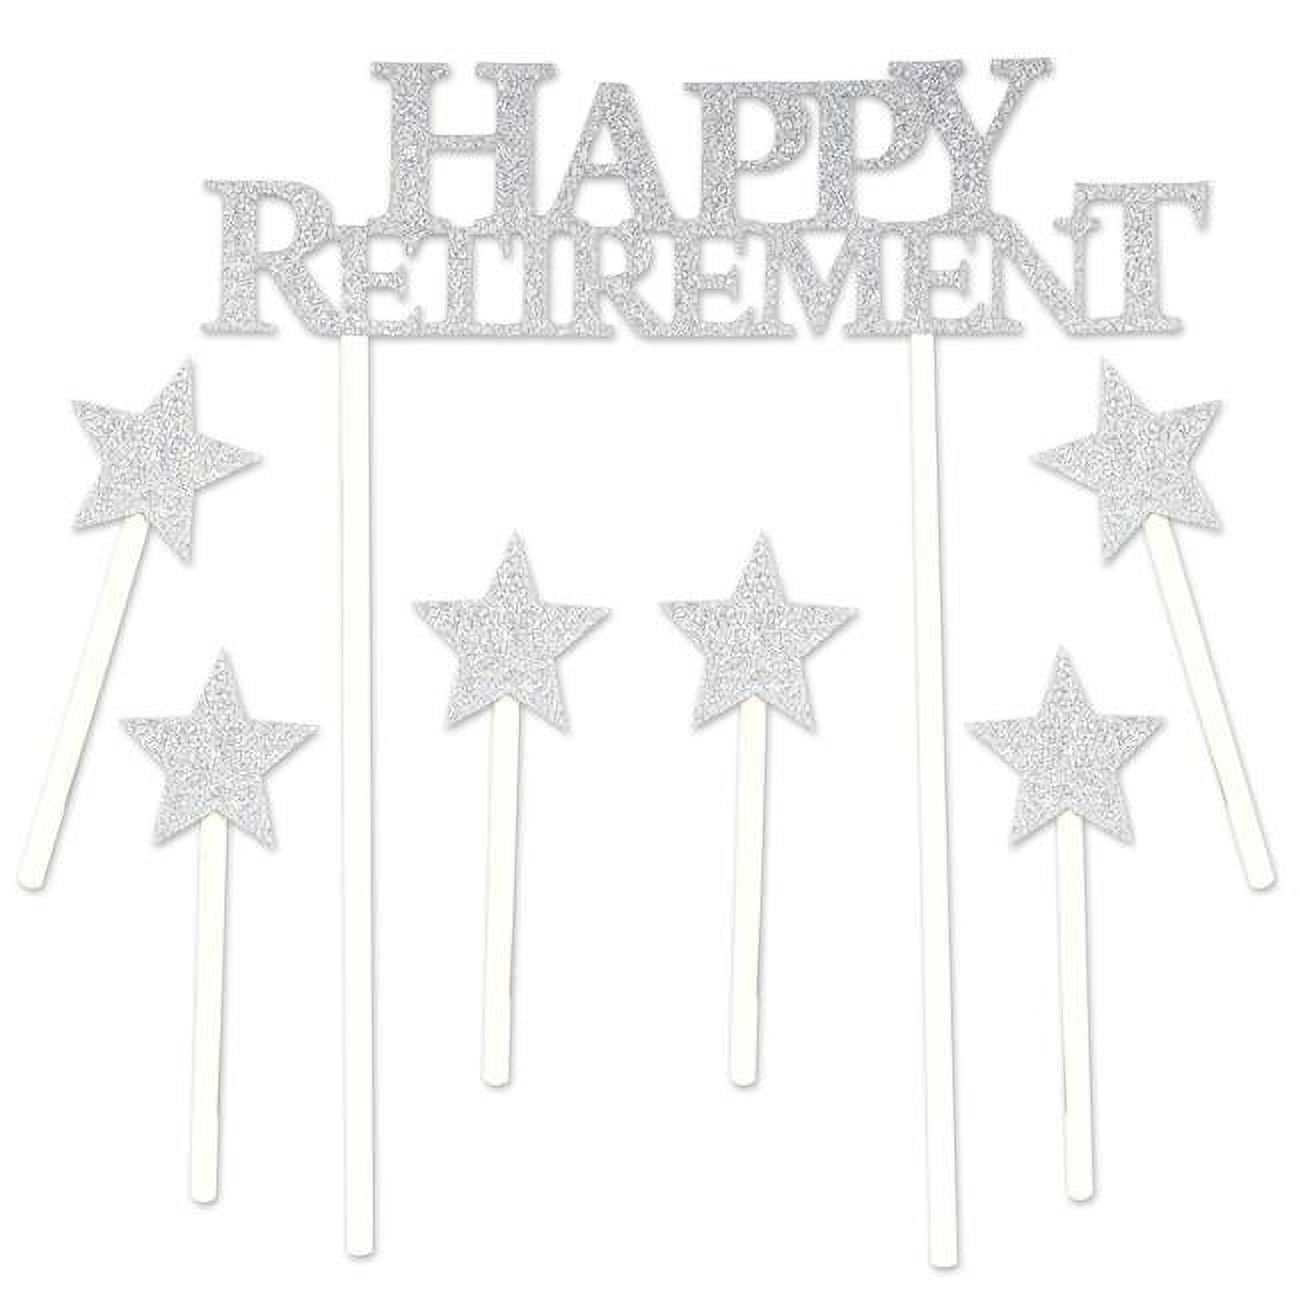 Picture of Beistle 57430 6 x 8.25 in. Happy Retirement Cake Topper - Pack of 12